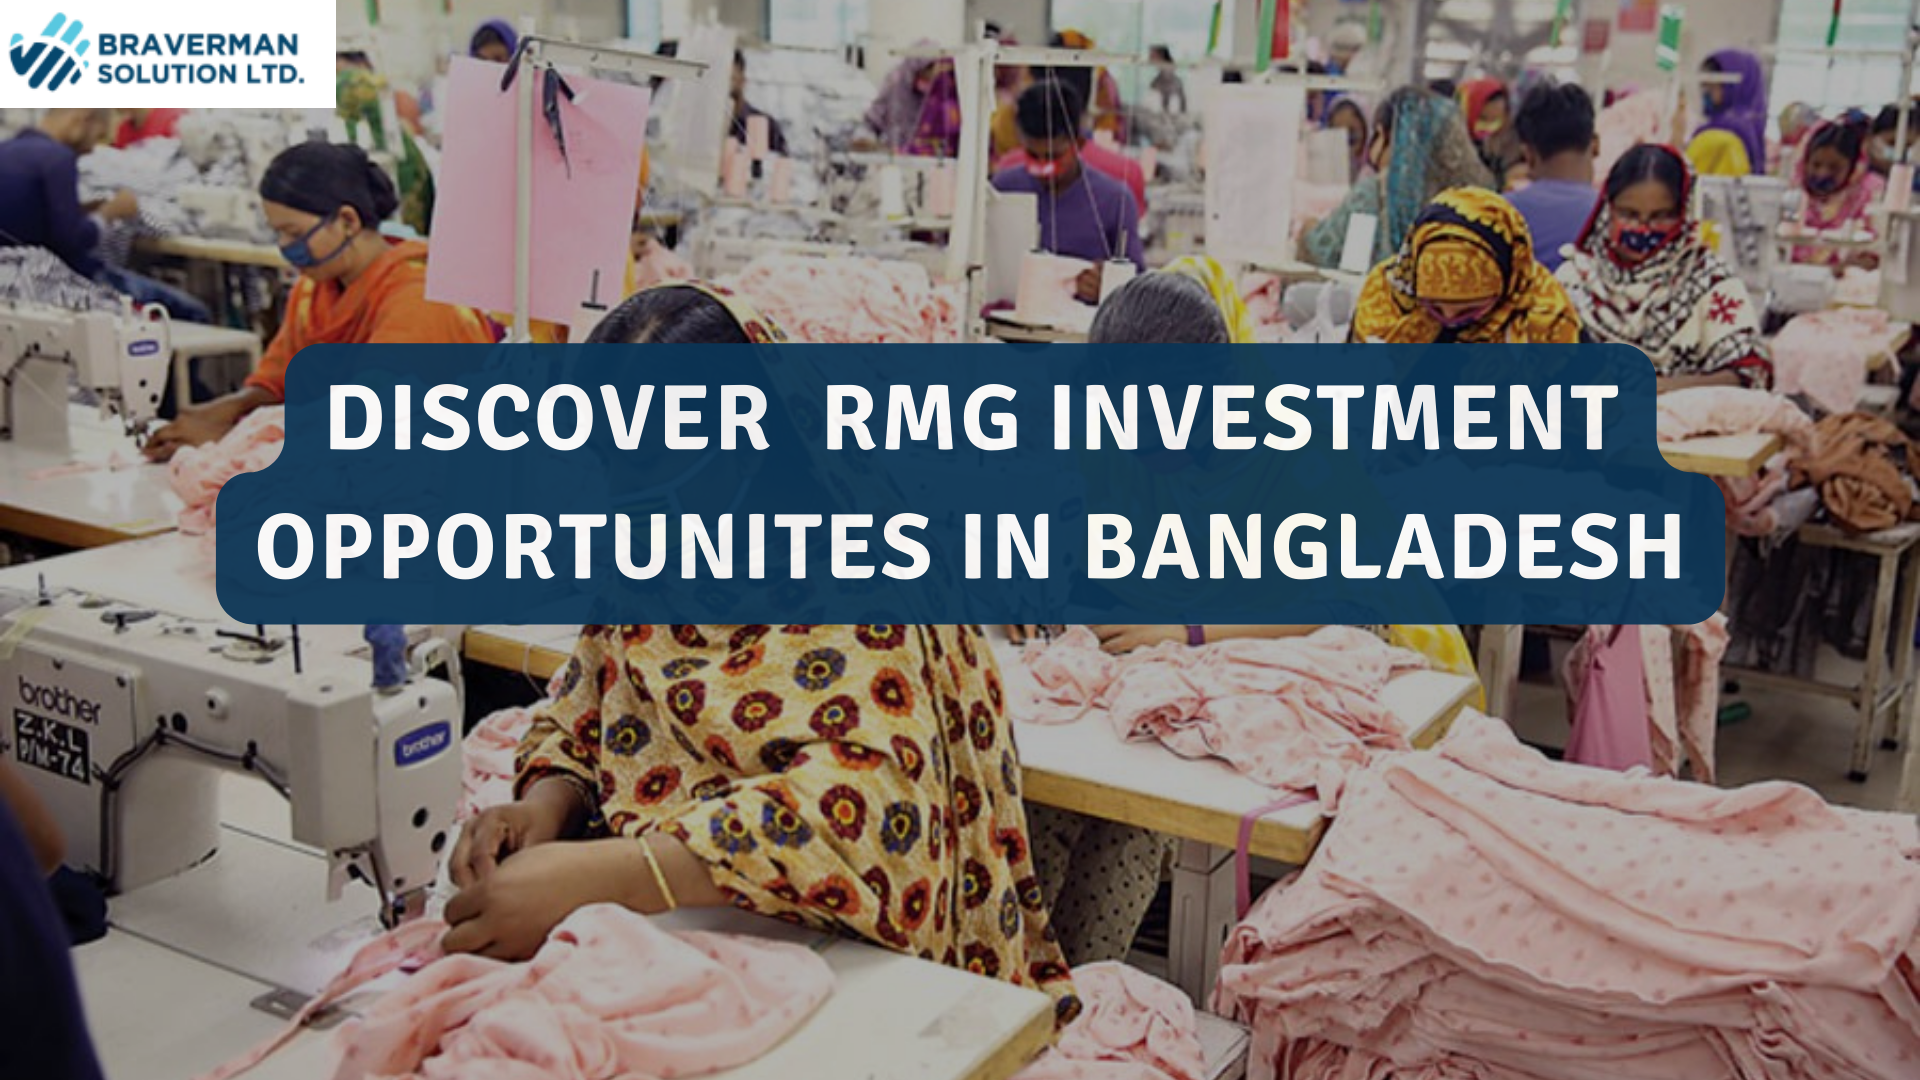 Investment in RMG